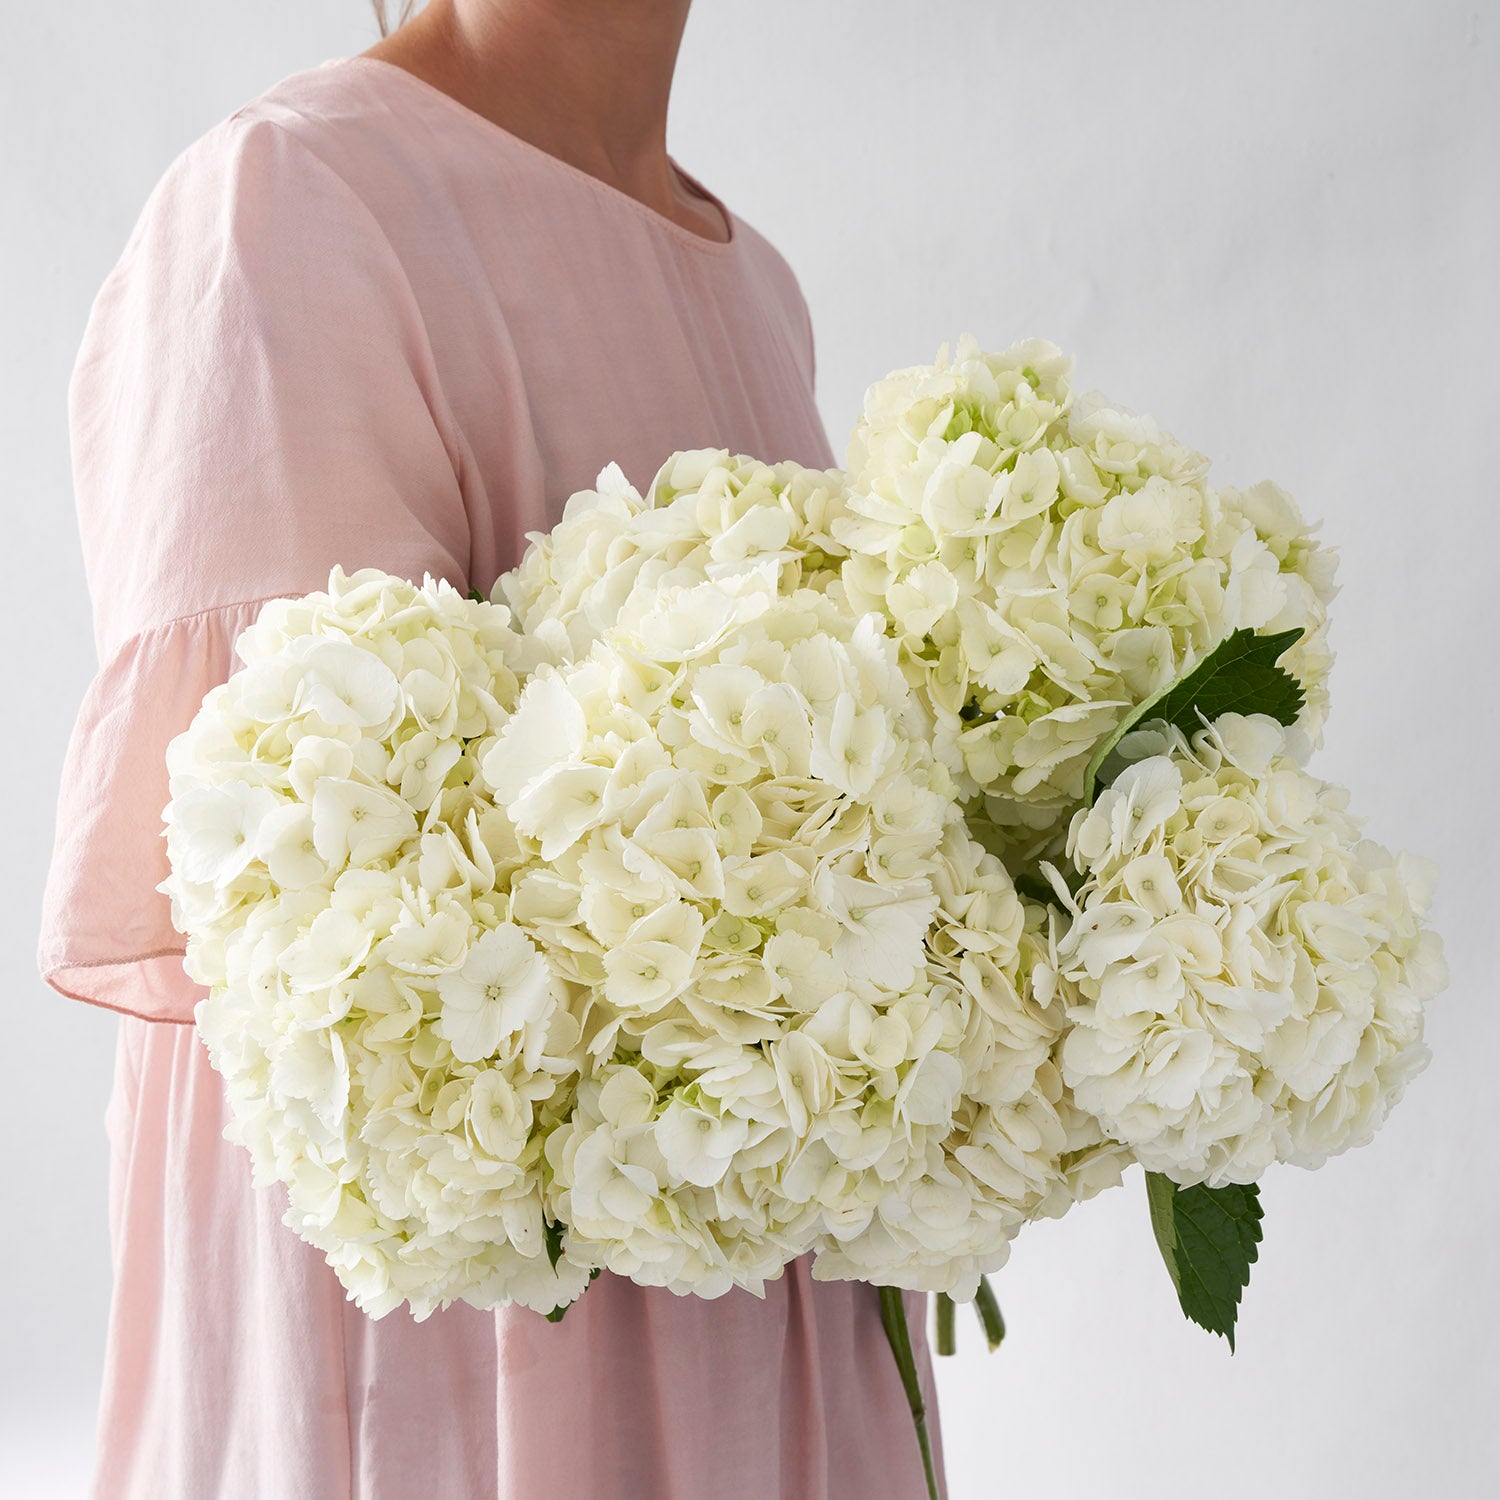 Woman in pink dress holding large bouquet of white hydrangea flowers.